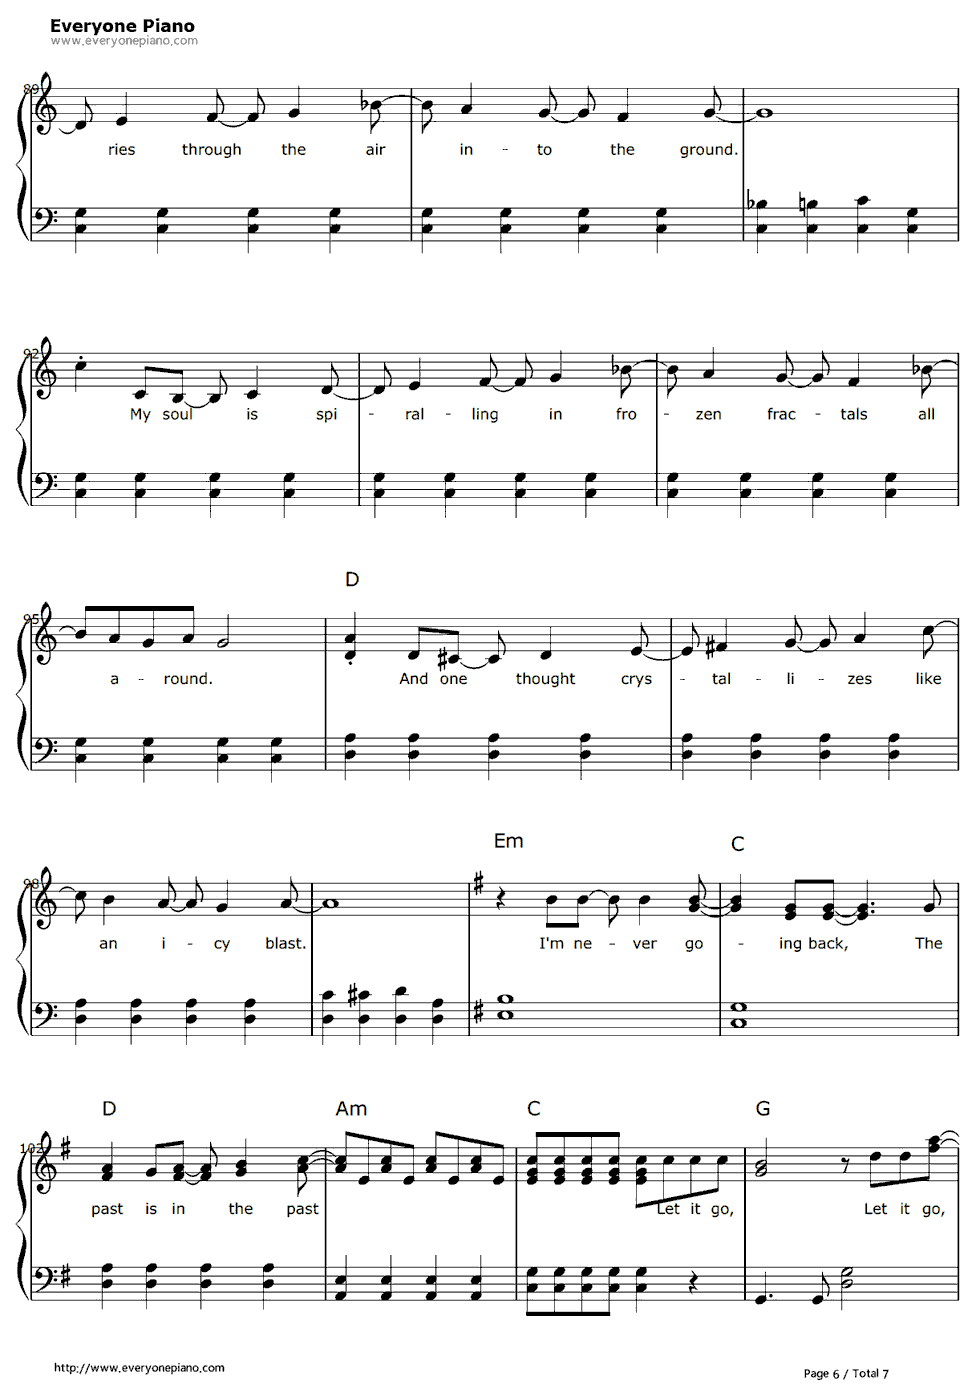 Free Let It Go Easy Version-Frozen Theme Sheet Music Preview 6 - Let It Go Violin Sheet Music Free Printable